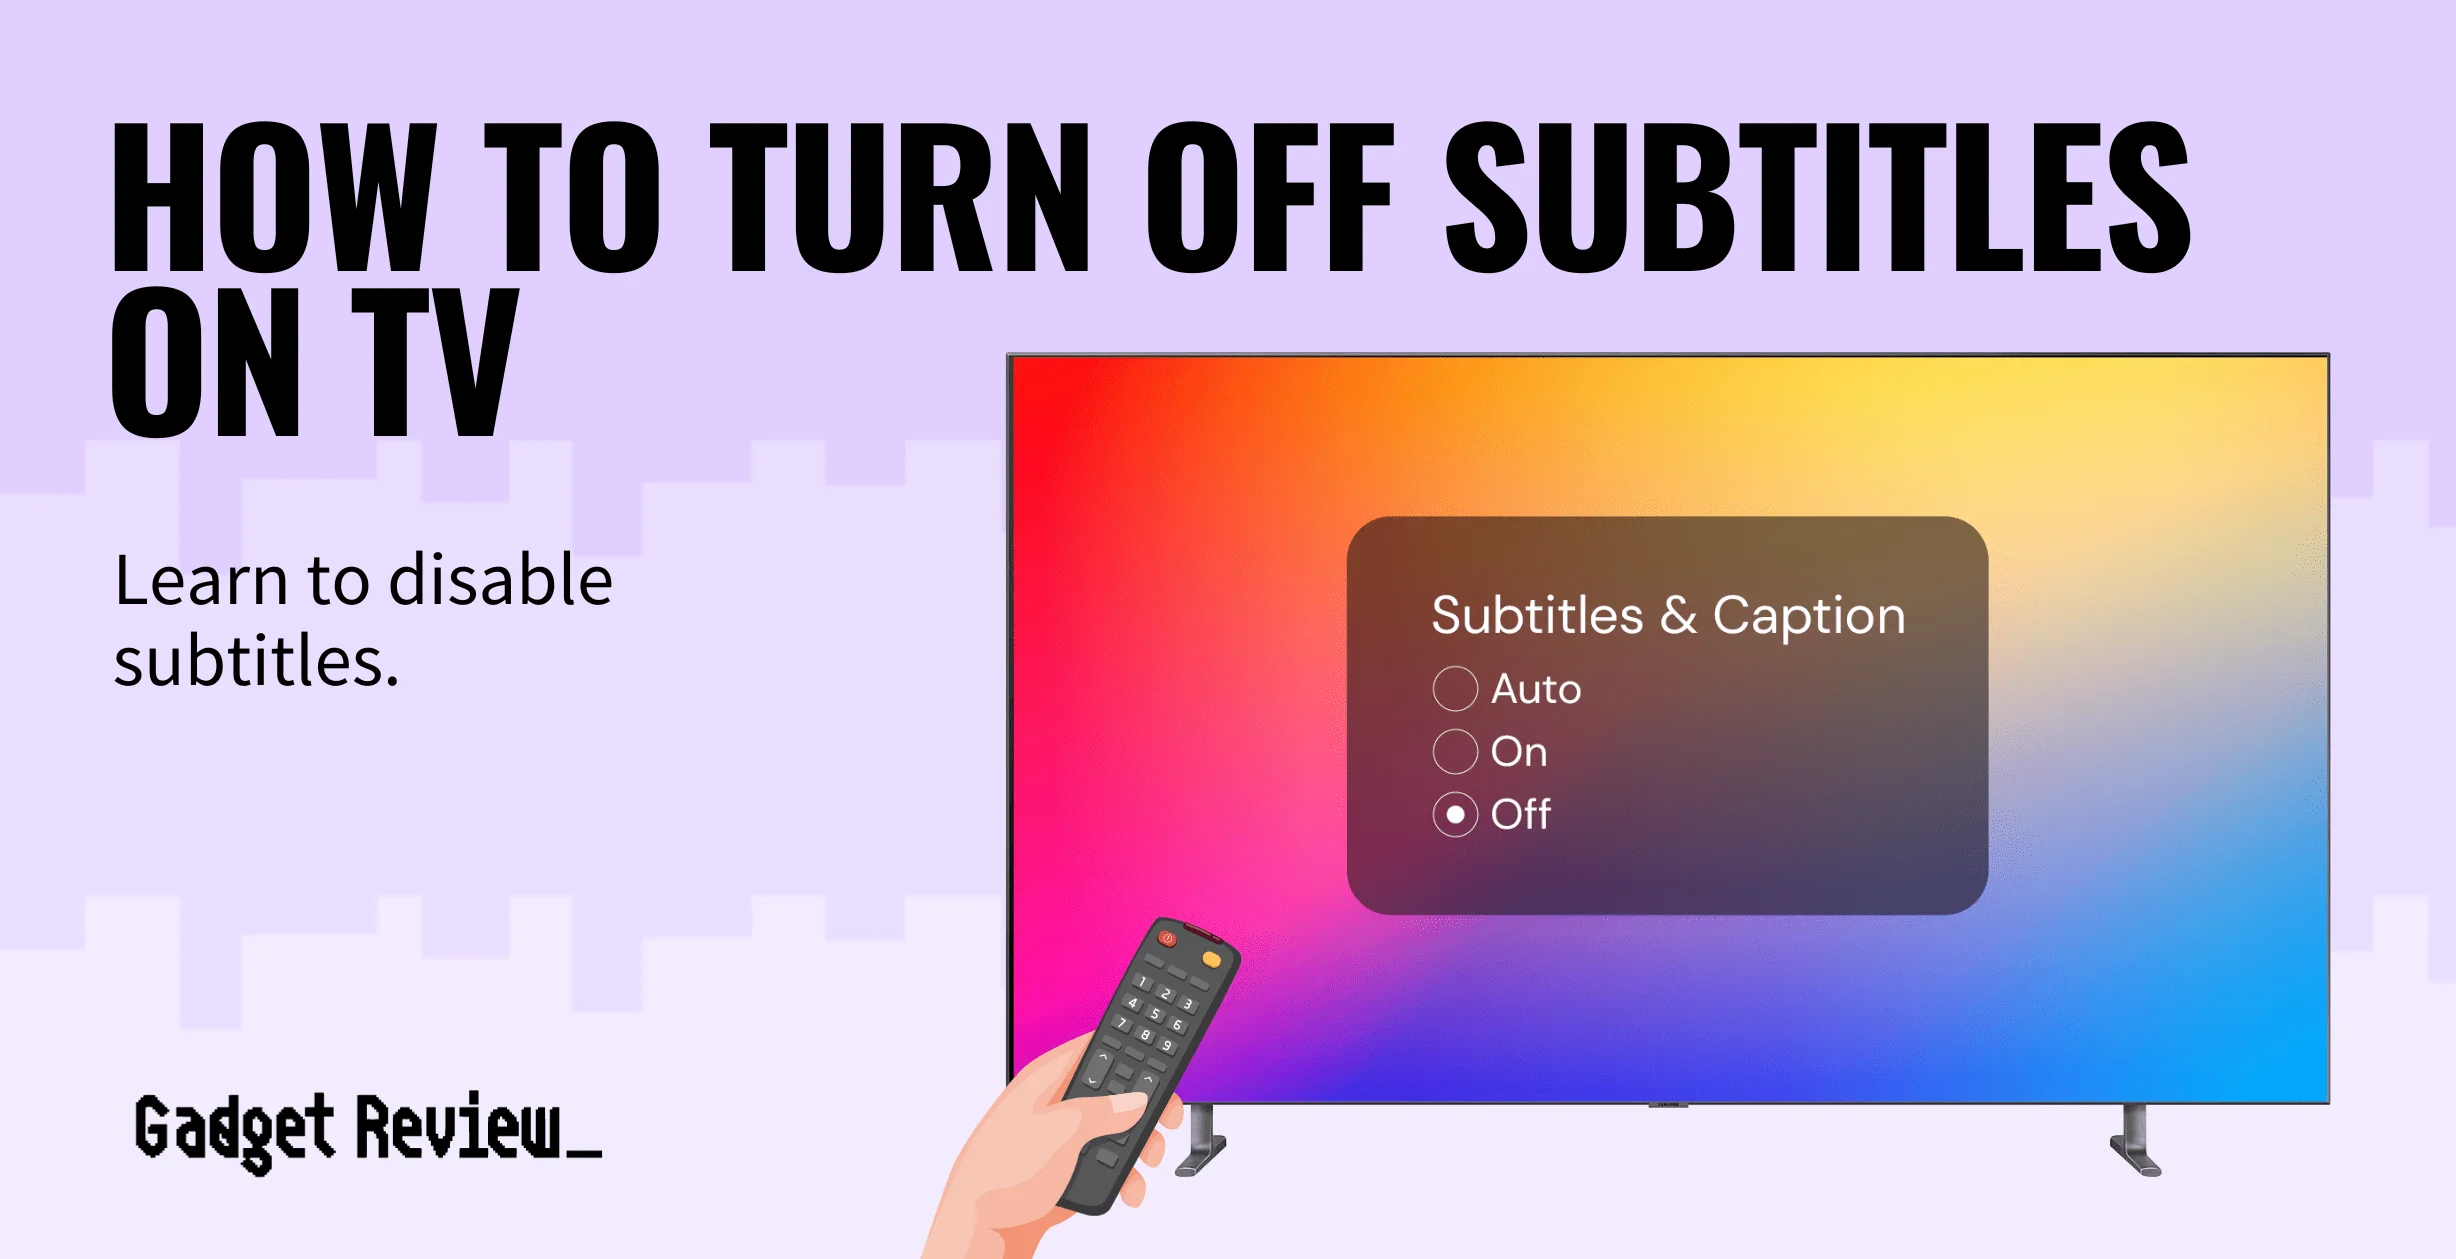 How to Turn Off Subtitles on a TV